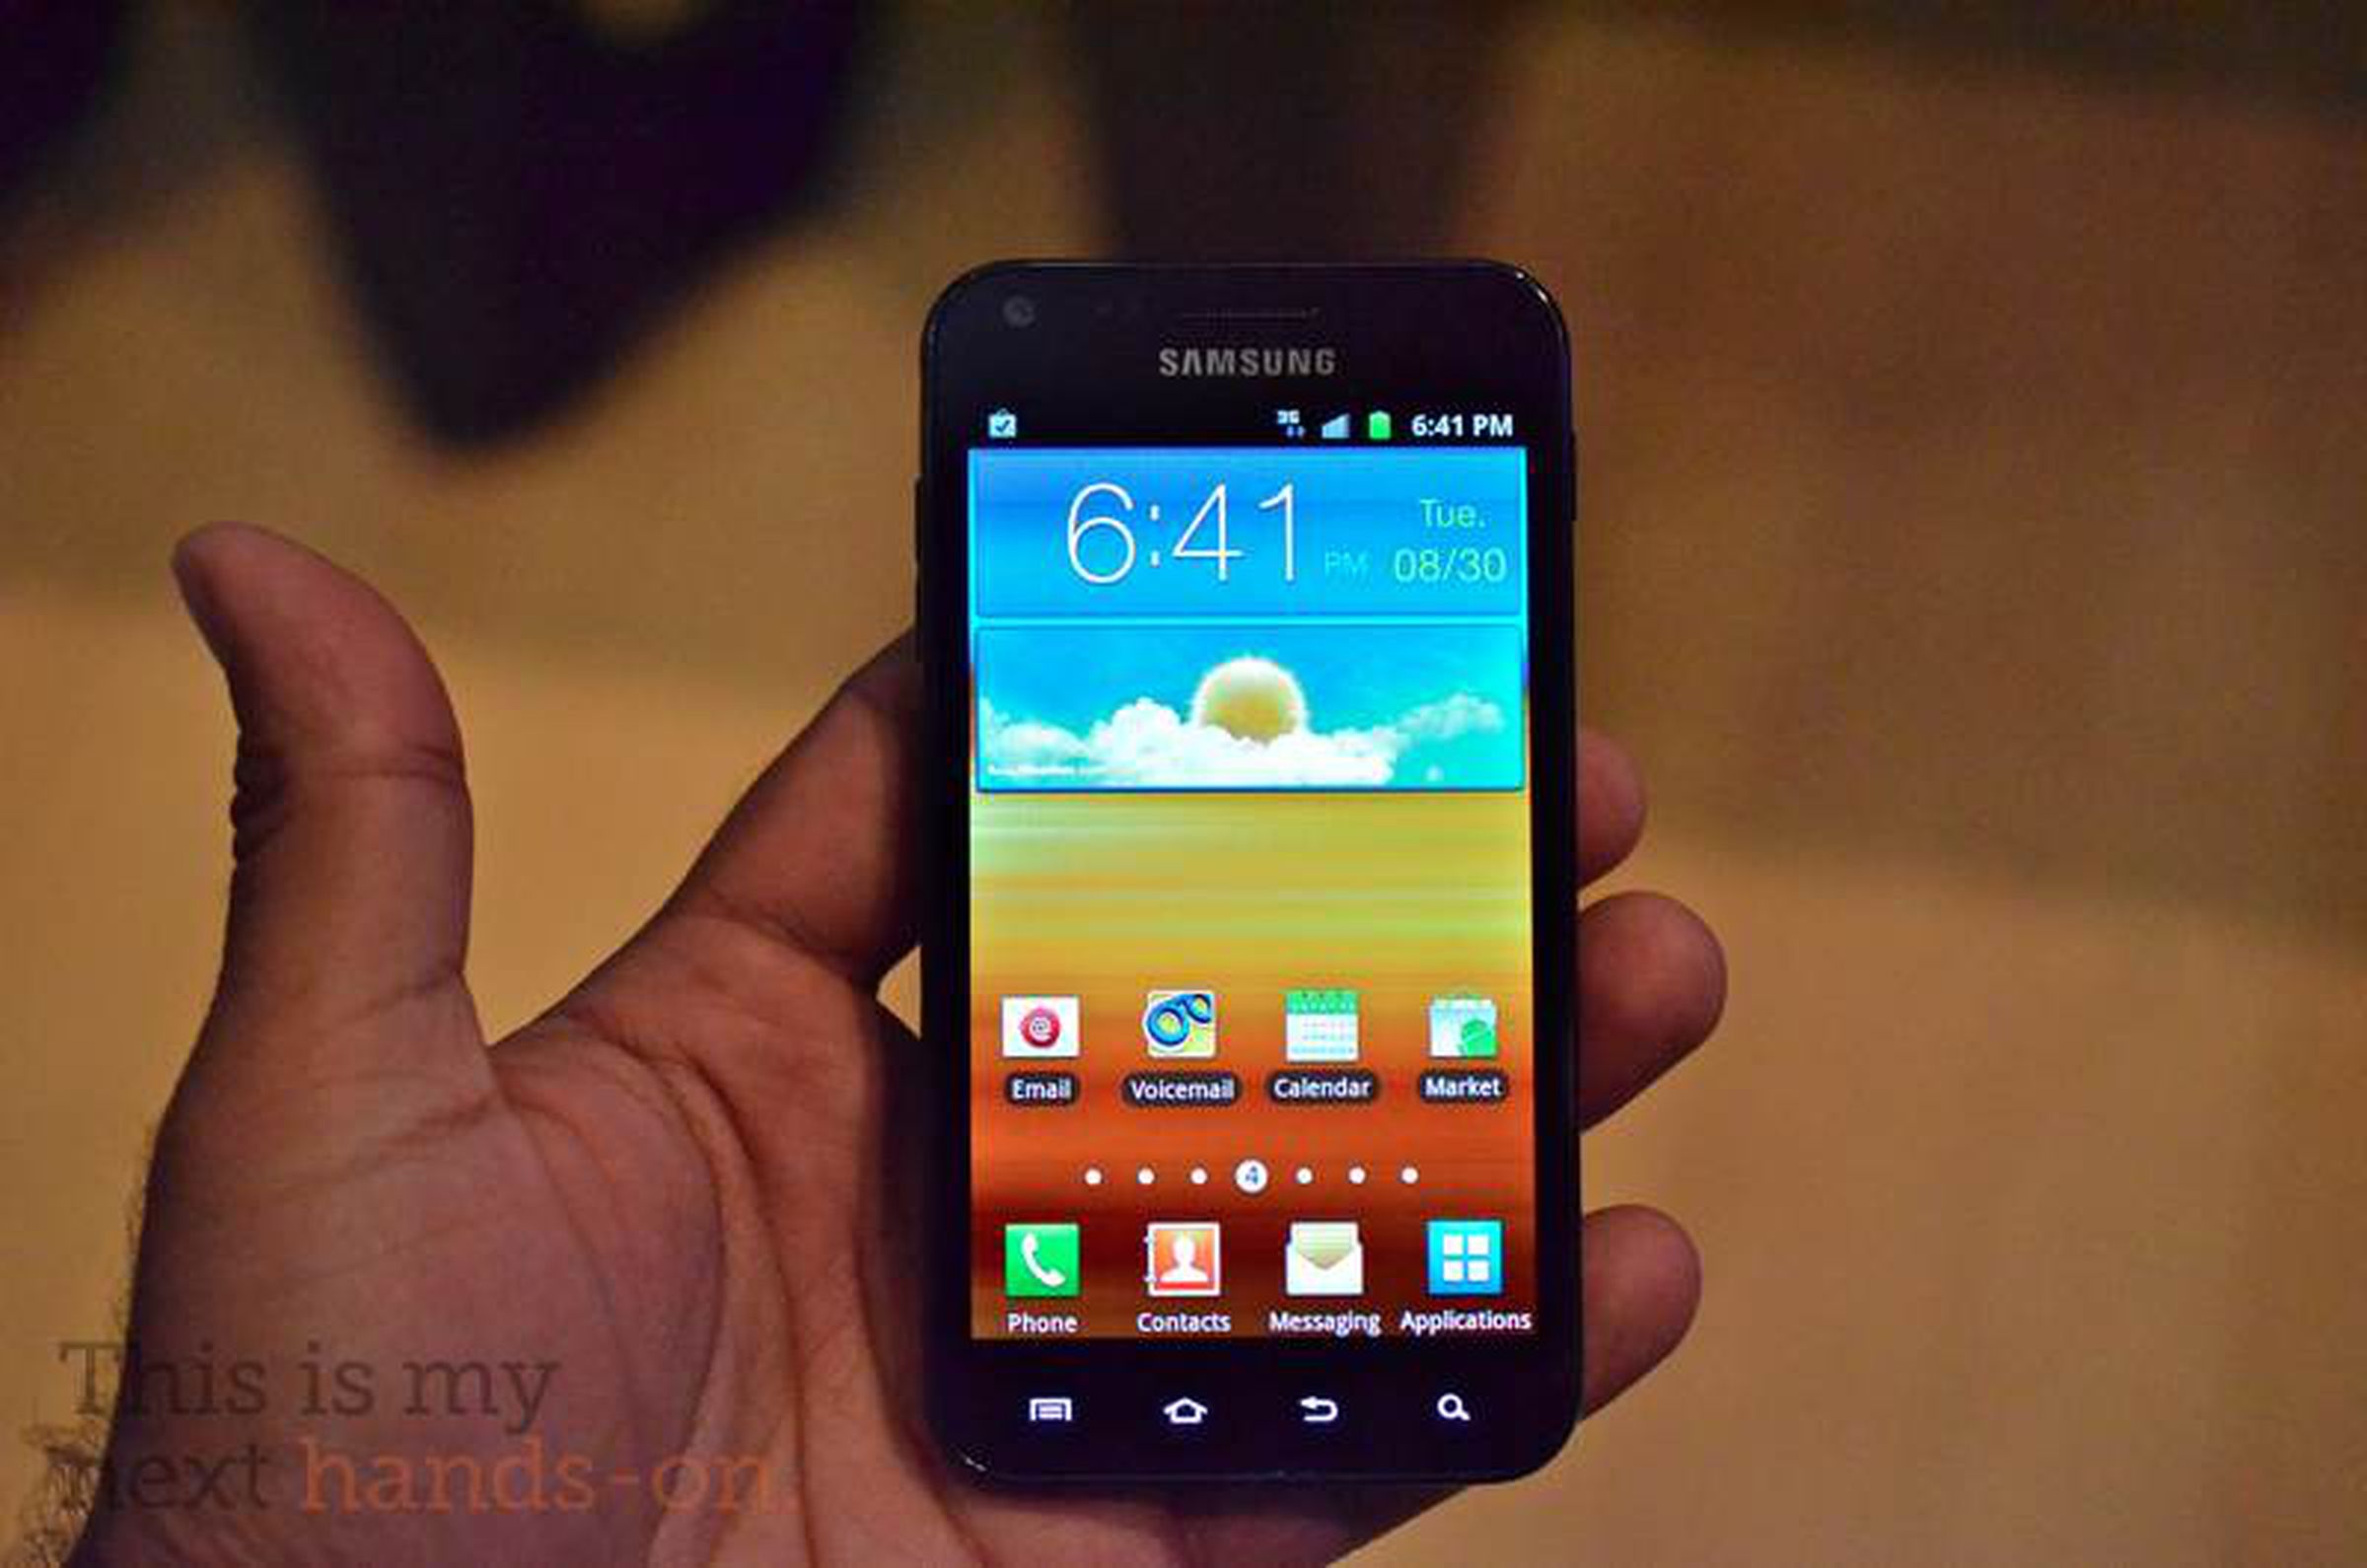 Sprint Galaxy S II Epic 4G Touch available September 16th for $199.99 on 2-year contract — Hands-on pictures!